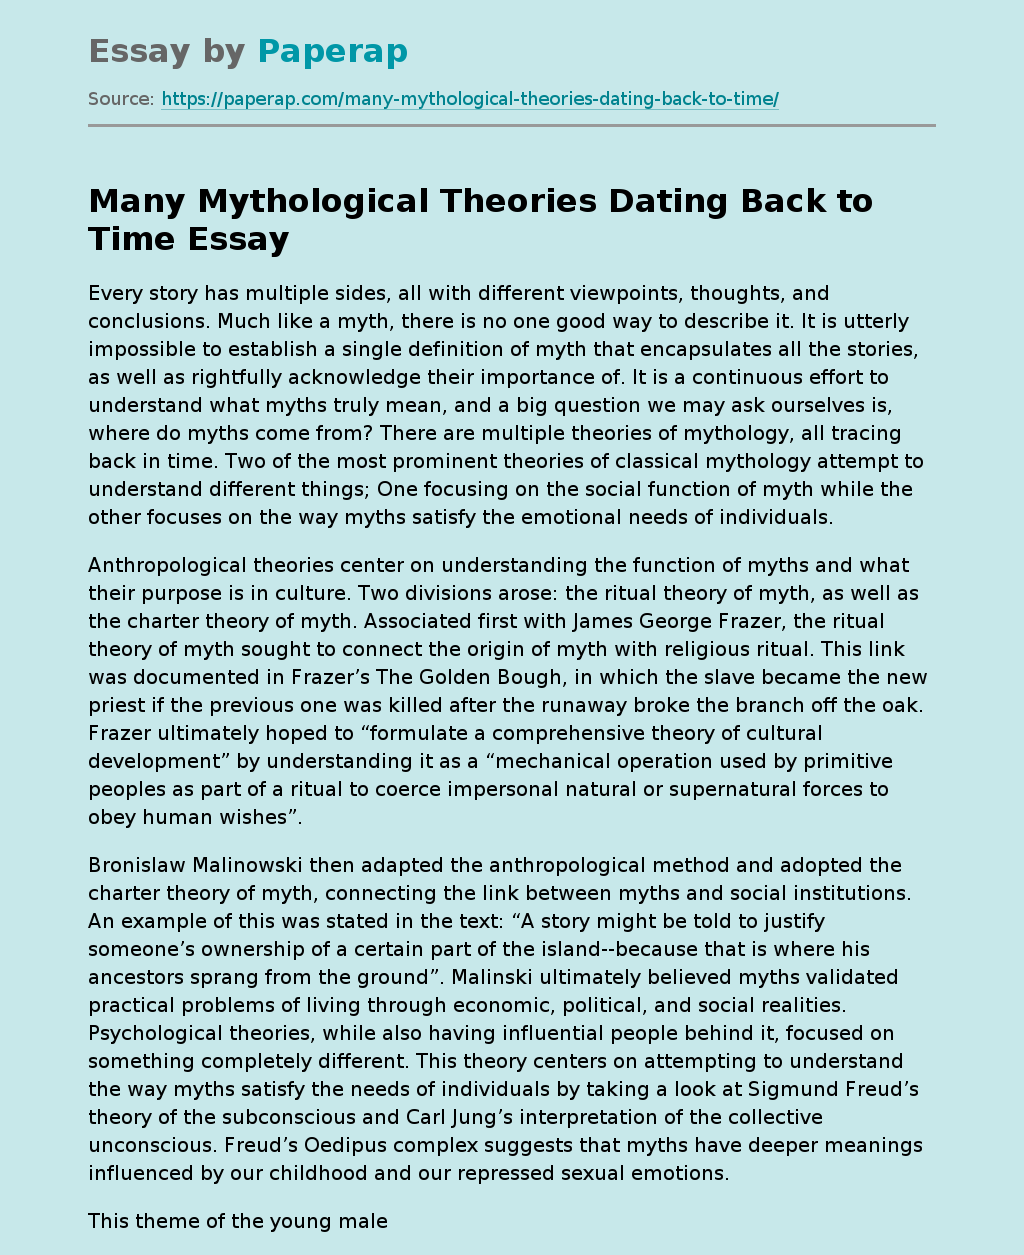 Many Mythological Theories Dating Back to Time